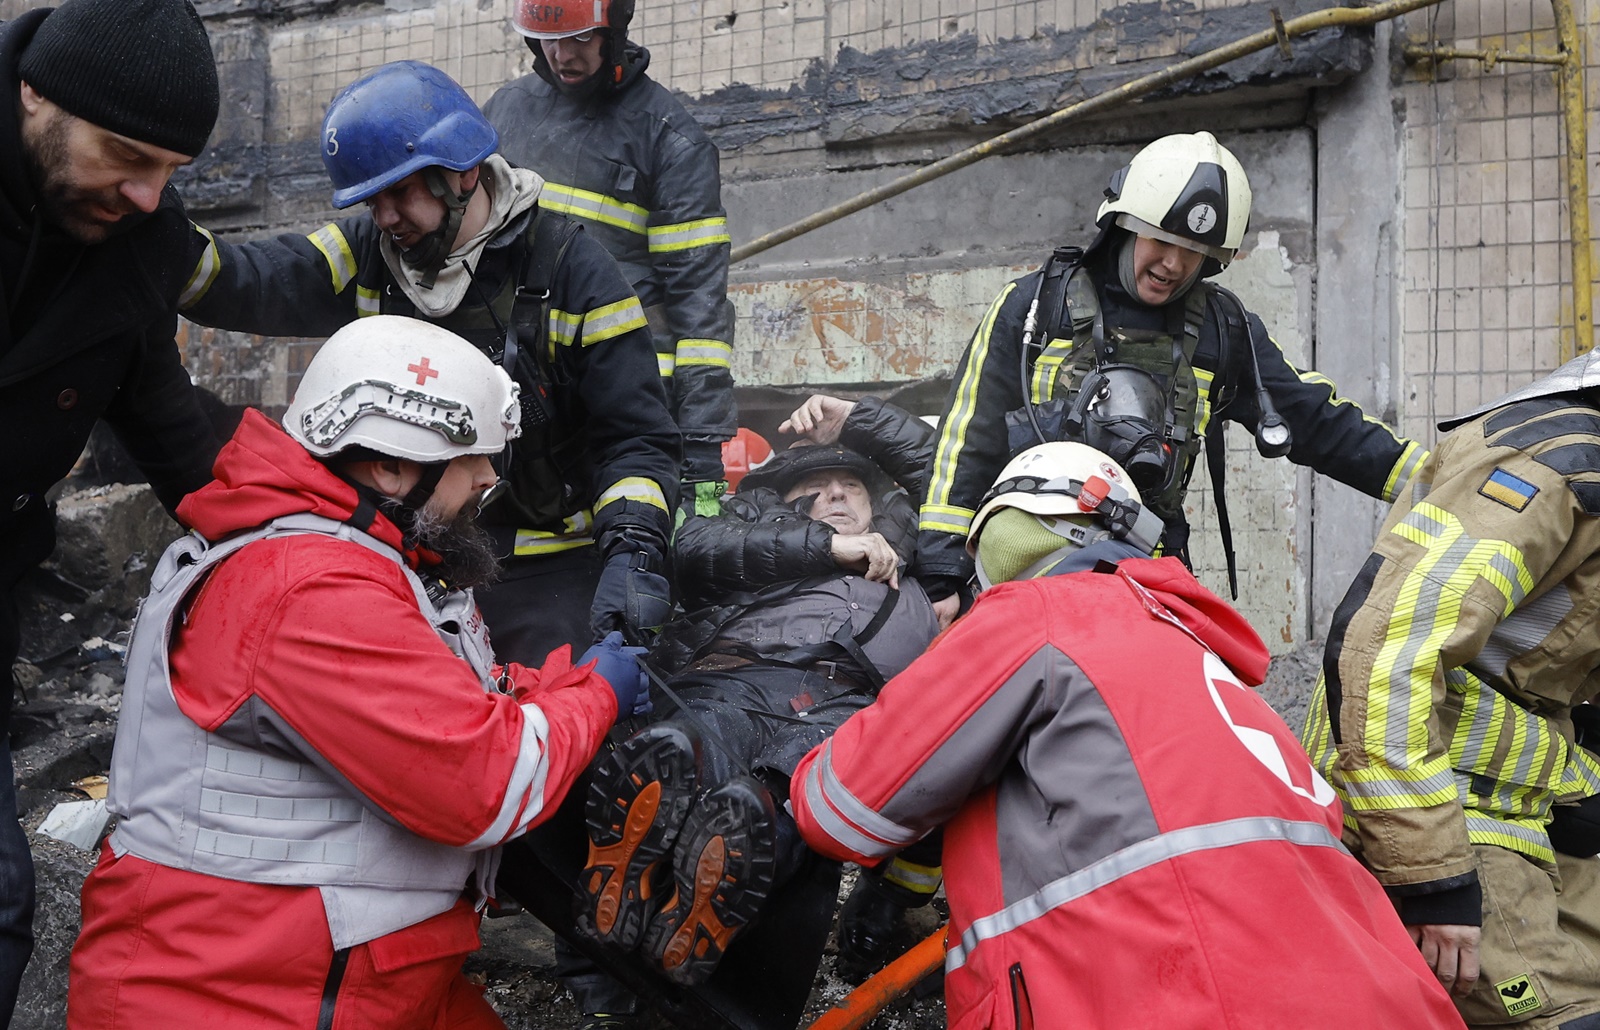 epa11053318 Rescuers and medics evacuate an injured man from the site of a damaged building after a missile strike in Kyiv, Ukraine, 02 January 2024, amid the Russian invasion. In the early hours of 02 January, Russia launched missile attacks targeting Kyiv and Kharkiv, local officials reported. At least two women were killed, and nearly 70 others were injured in the two cities. In Kyiv, 27 people were hospitalized after a fire broke out in a multi-story building as a result of a rocket attack, the city mayor Vitali Klitschko wrote on telegram, adding that an injured elderly woman died in an ambulance. Some 130 residents were evacuated from the burning building, the State Emergency Service said.  EPA/SERGEY DOLZHENKO